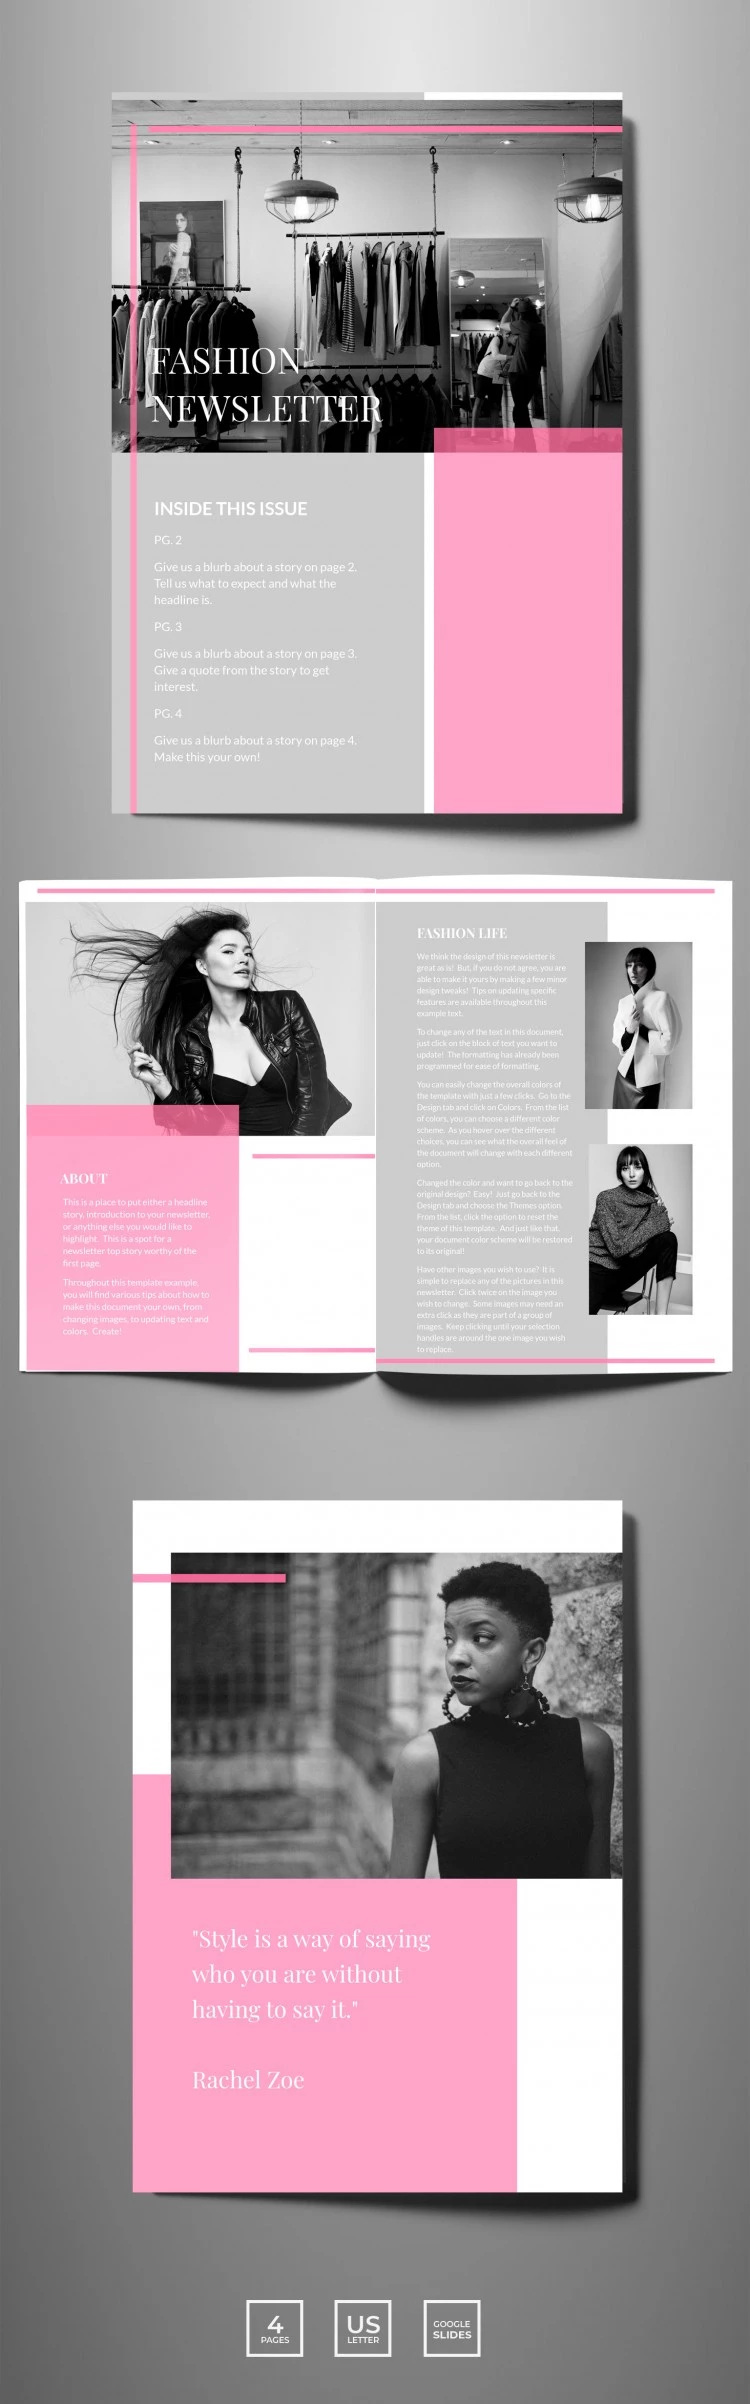 Fashion Newsletters - free Google Docs Template - 10061919